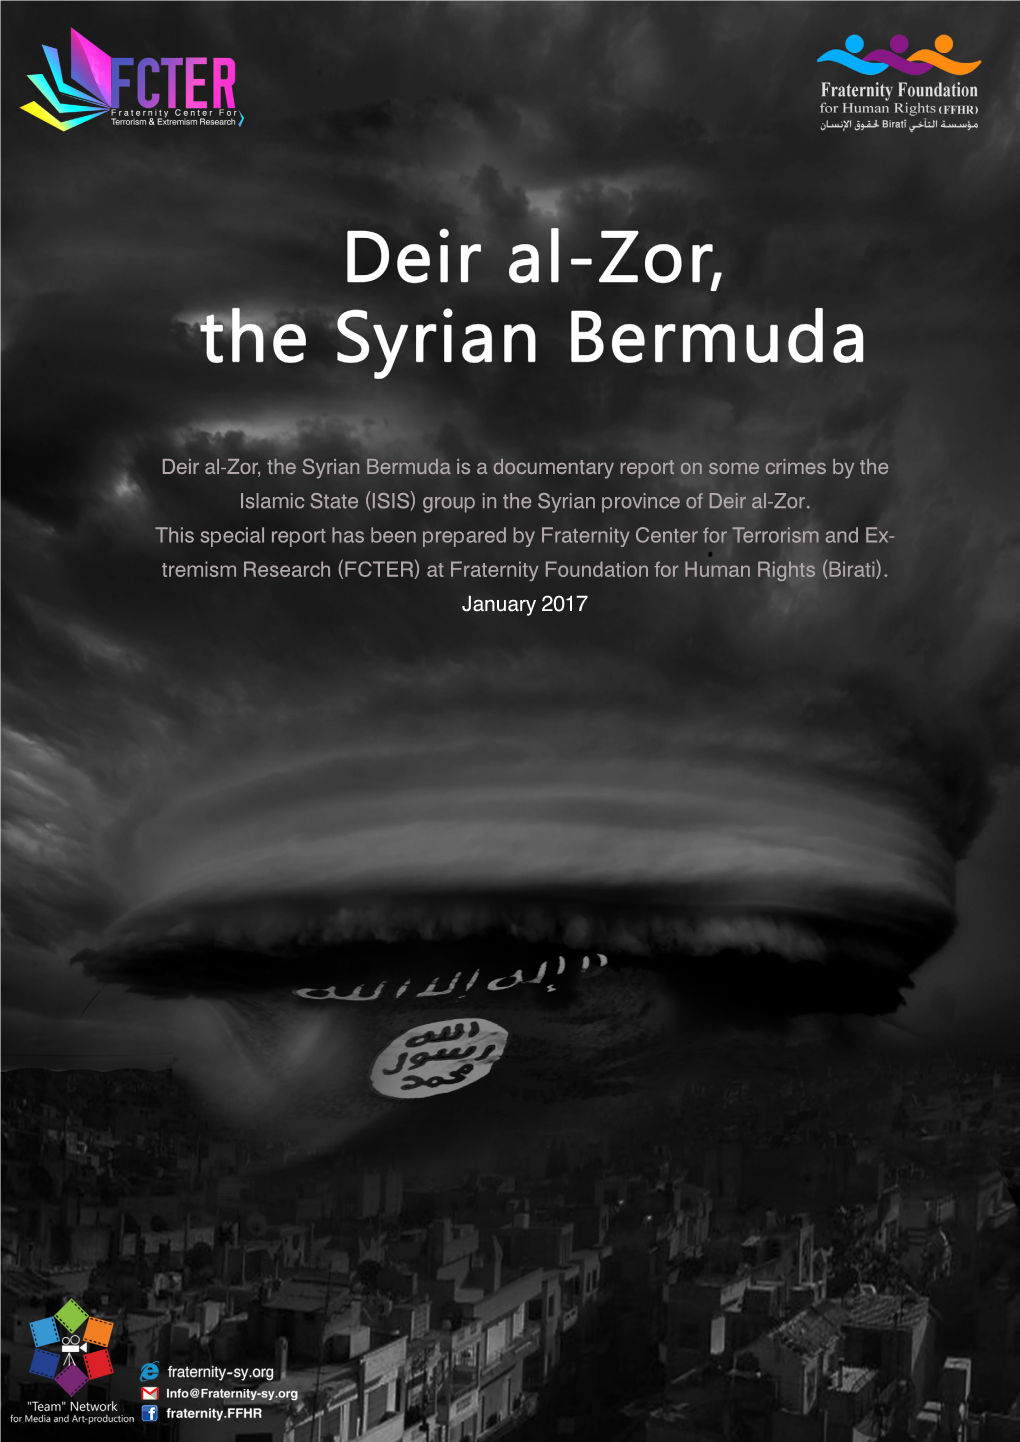 Deir Al-Zor, the Syrian Bermuda Is a Documentary Report on Some Crimes by the Islamic State (ISIS) Group in the Syrian Province of Deir Al-Zor